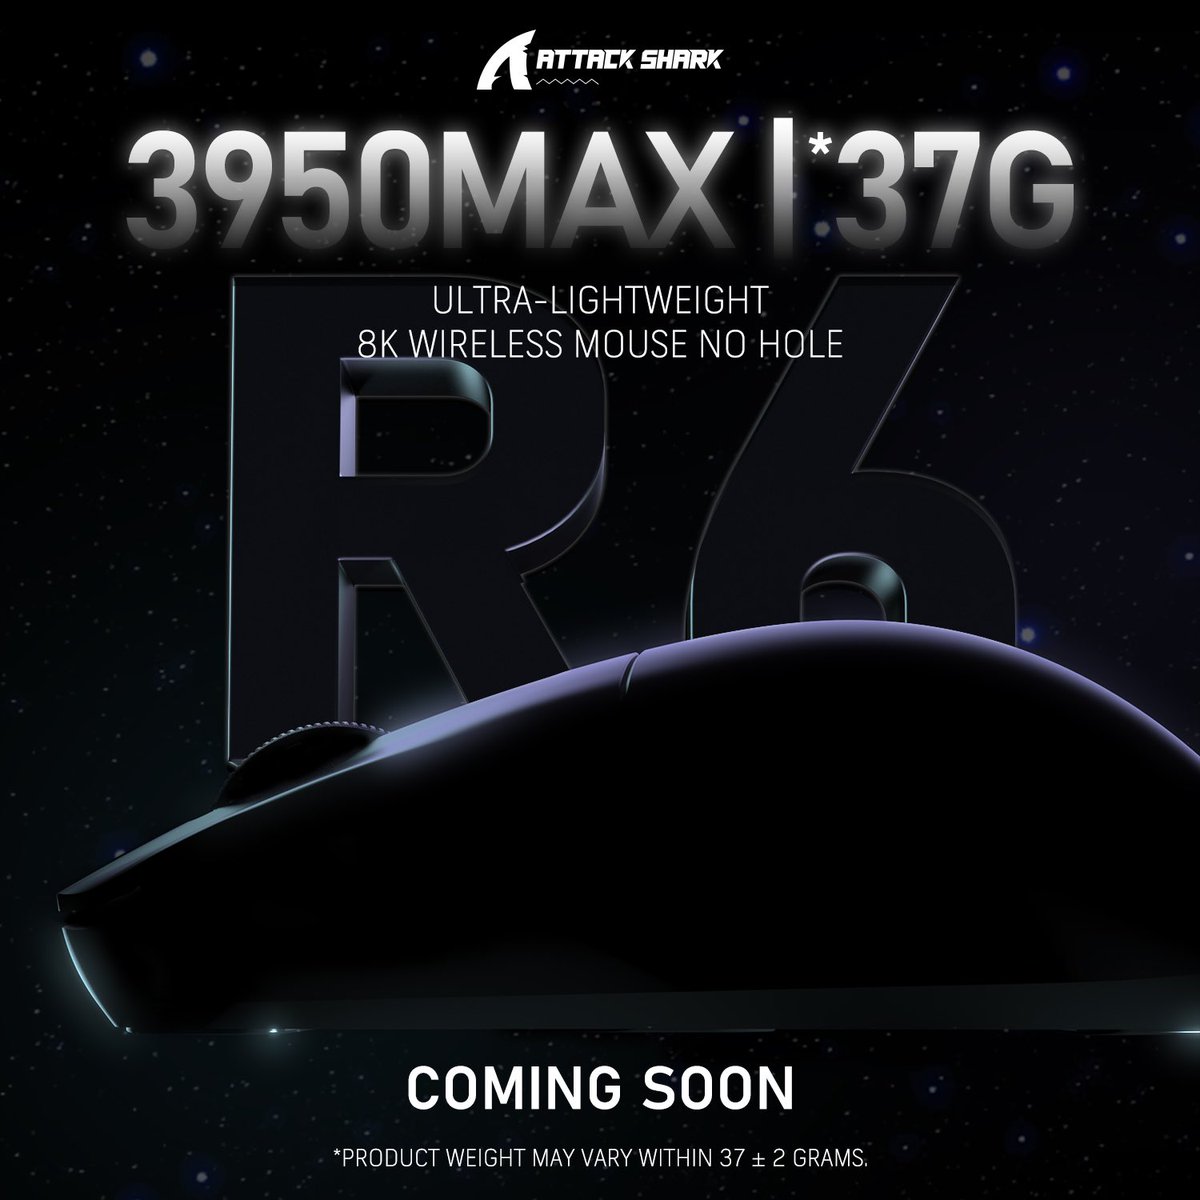 Attack Shark is pumping out crazy!
What are your thoughts?

“R6 Mouse is coming soon.

🔝MEET AT THE TOP.

✔️Pixart Sensor: PAW 3950 MAX

🖱️37g Superlight Design

 8⃣ 8K Polling Rate”
#attackshark #3950max